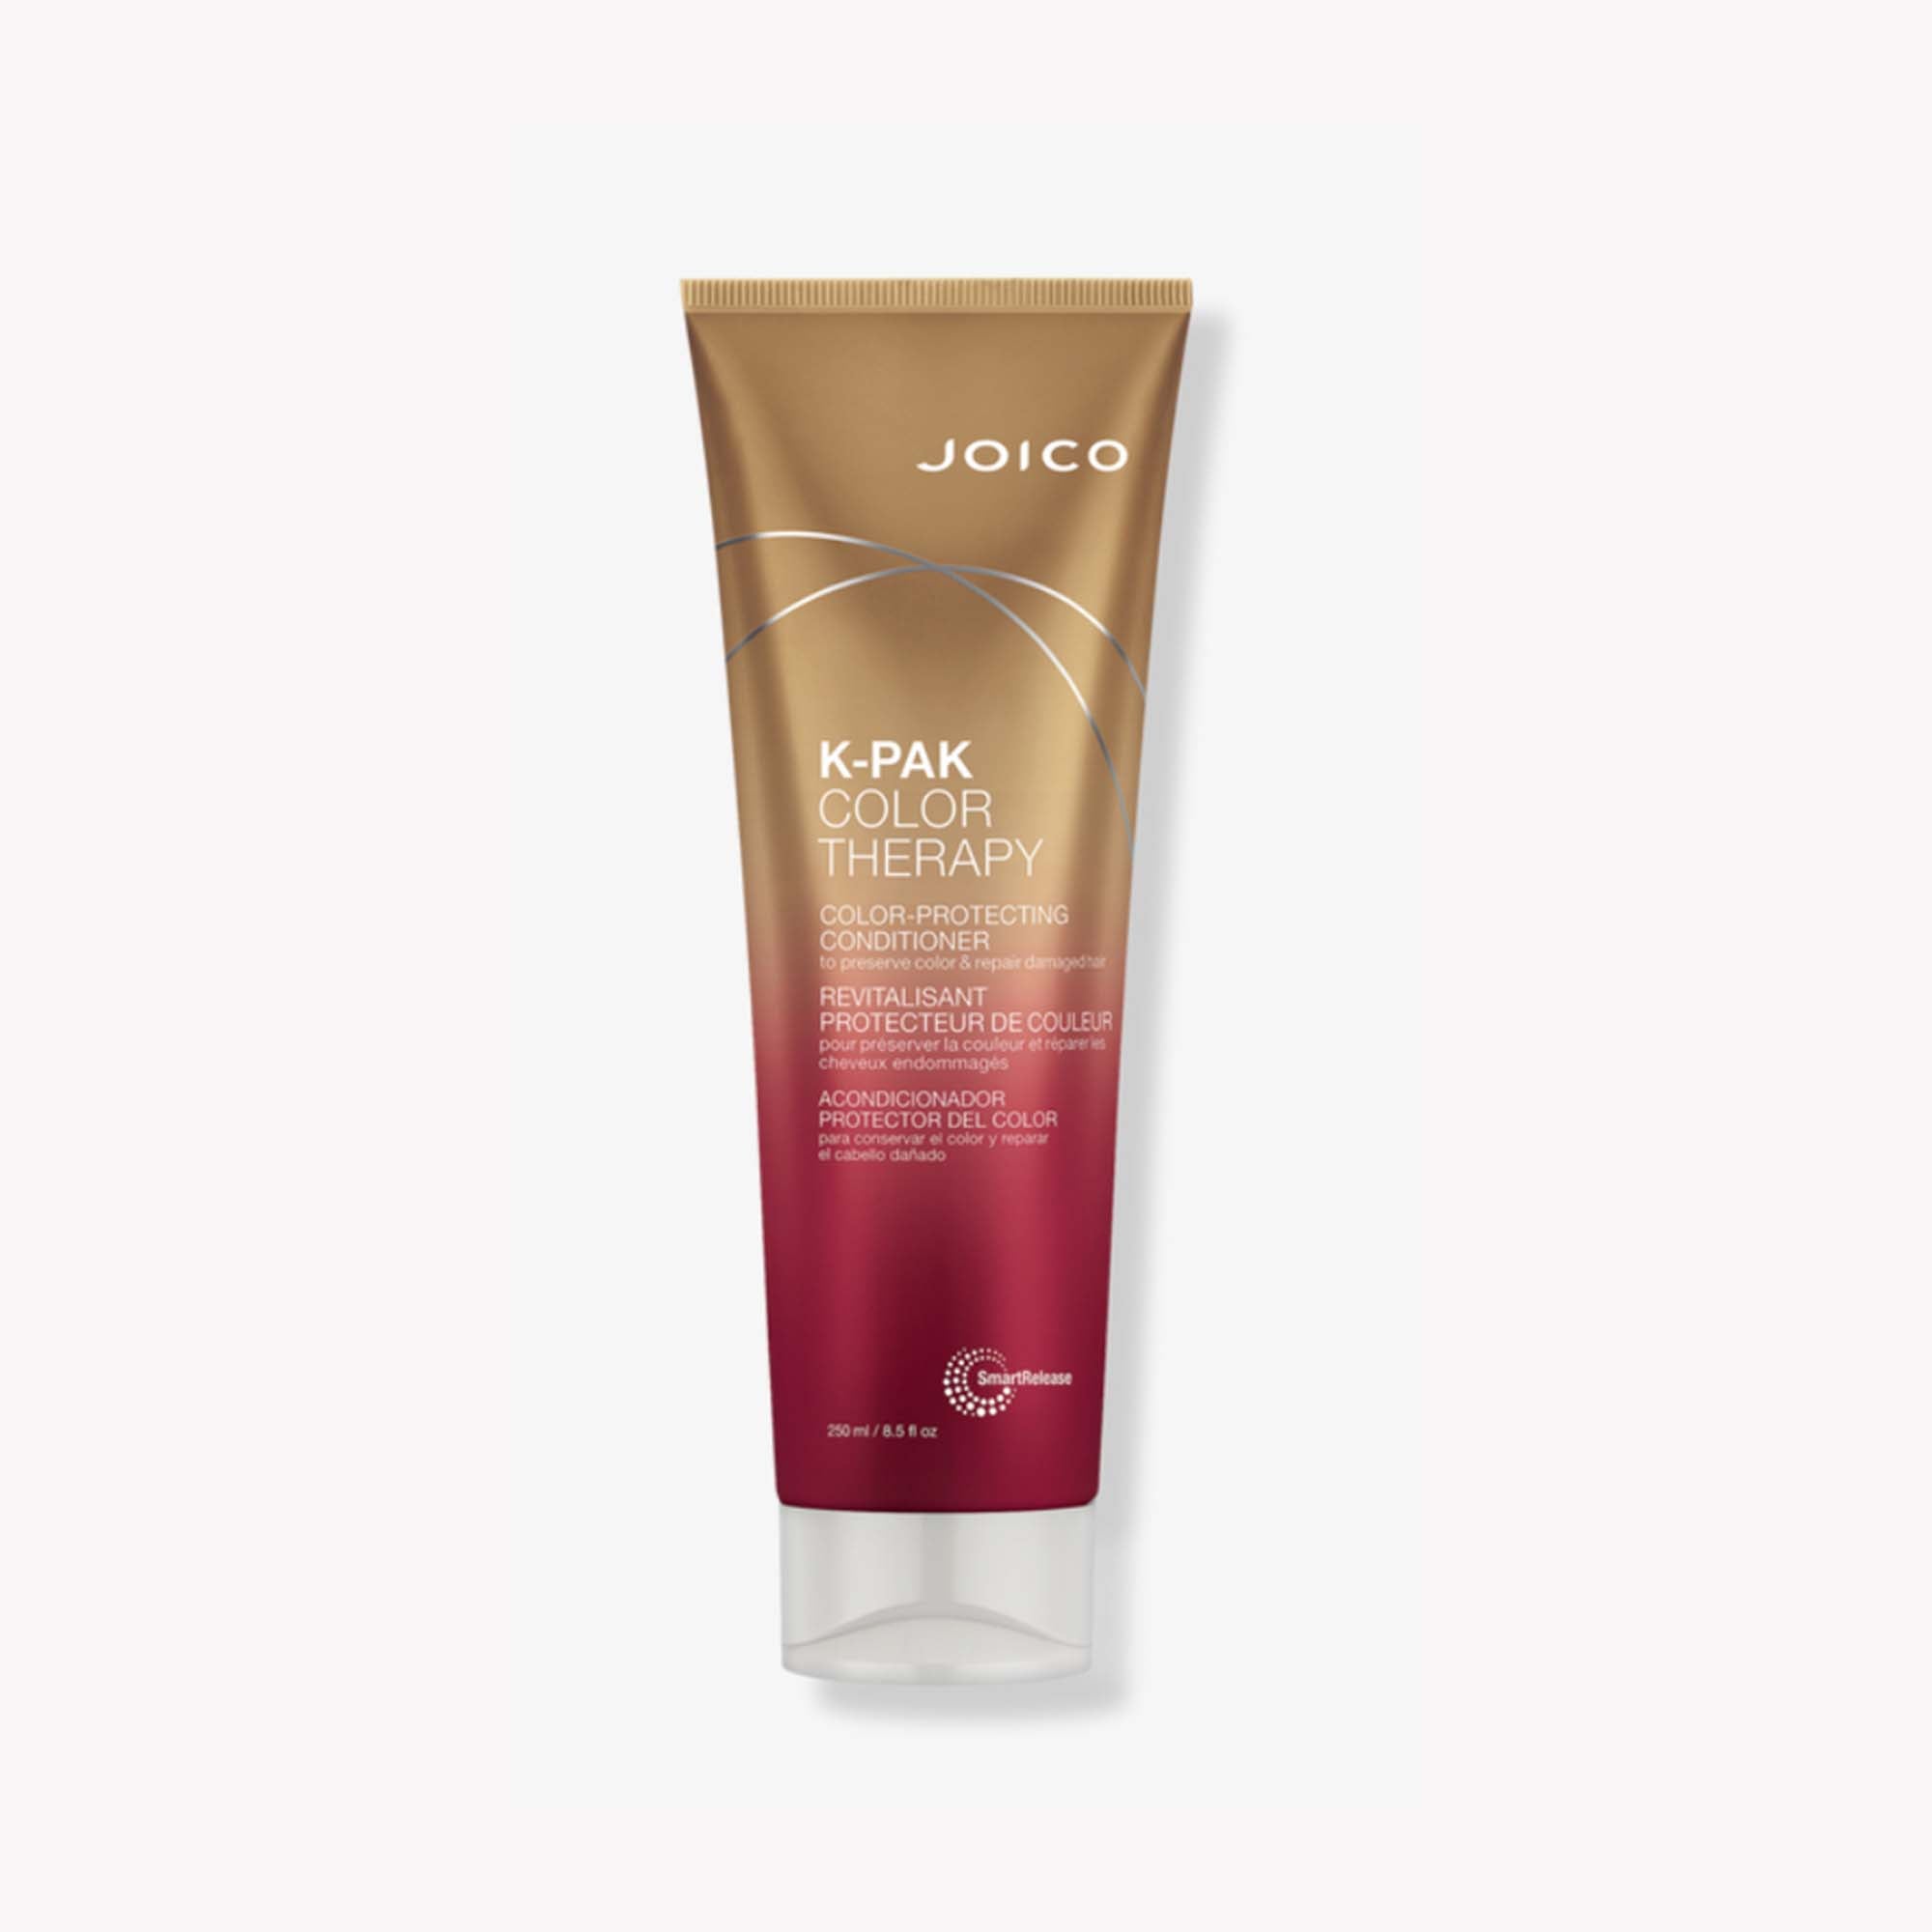 Joico K-PAK Color Therapy Conditioner 8.5oz